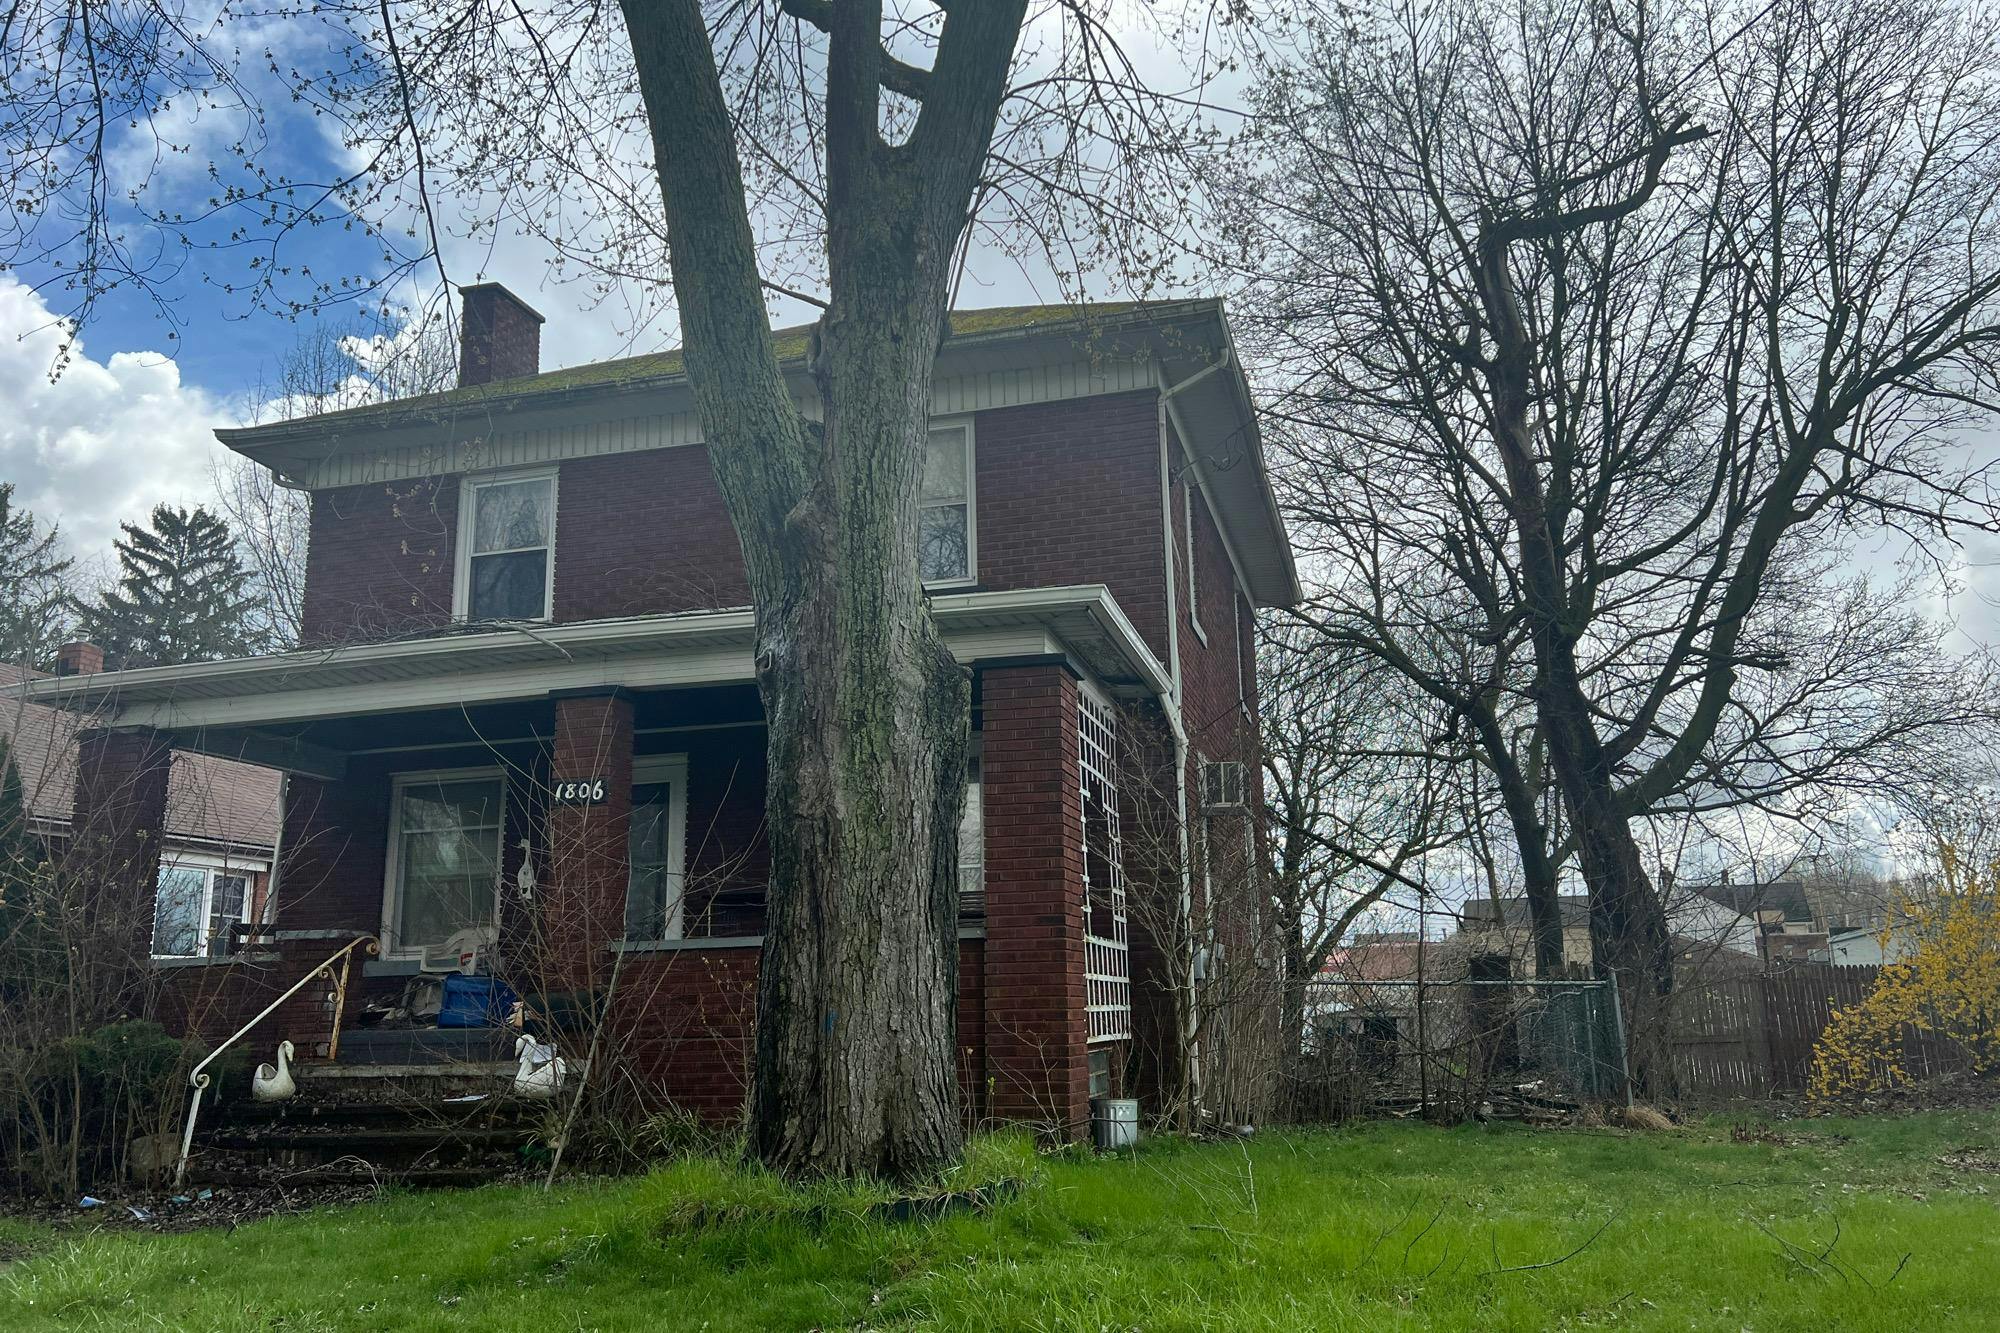 40th St, Canton, OH 44709 #1